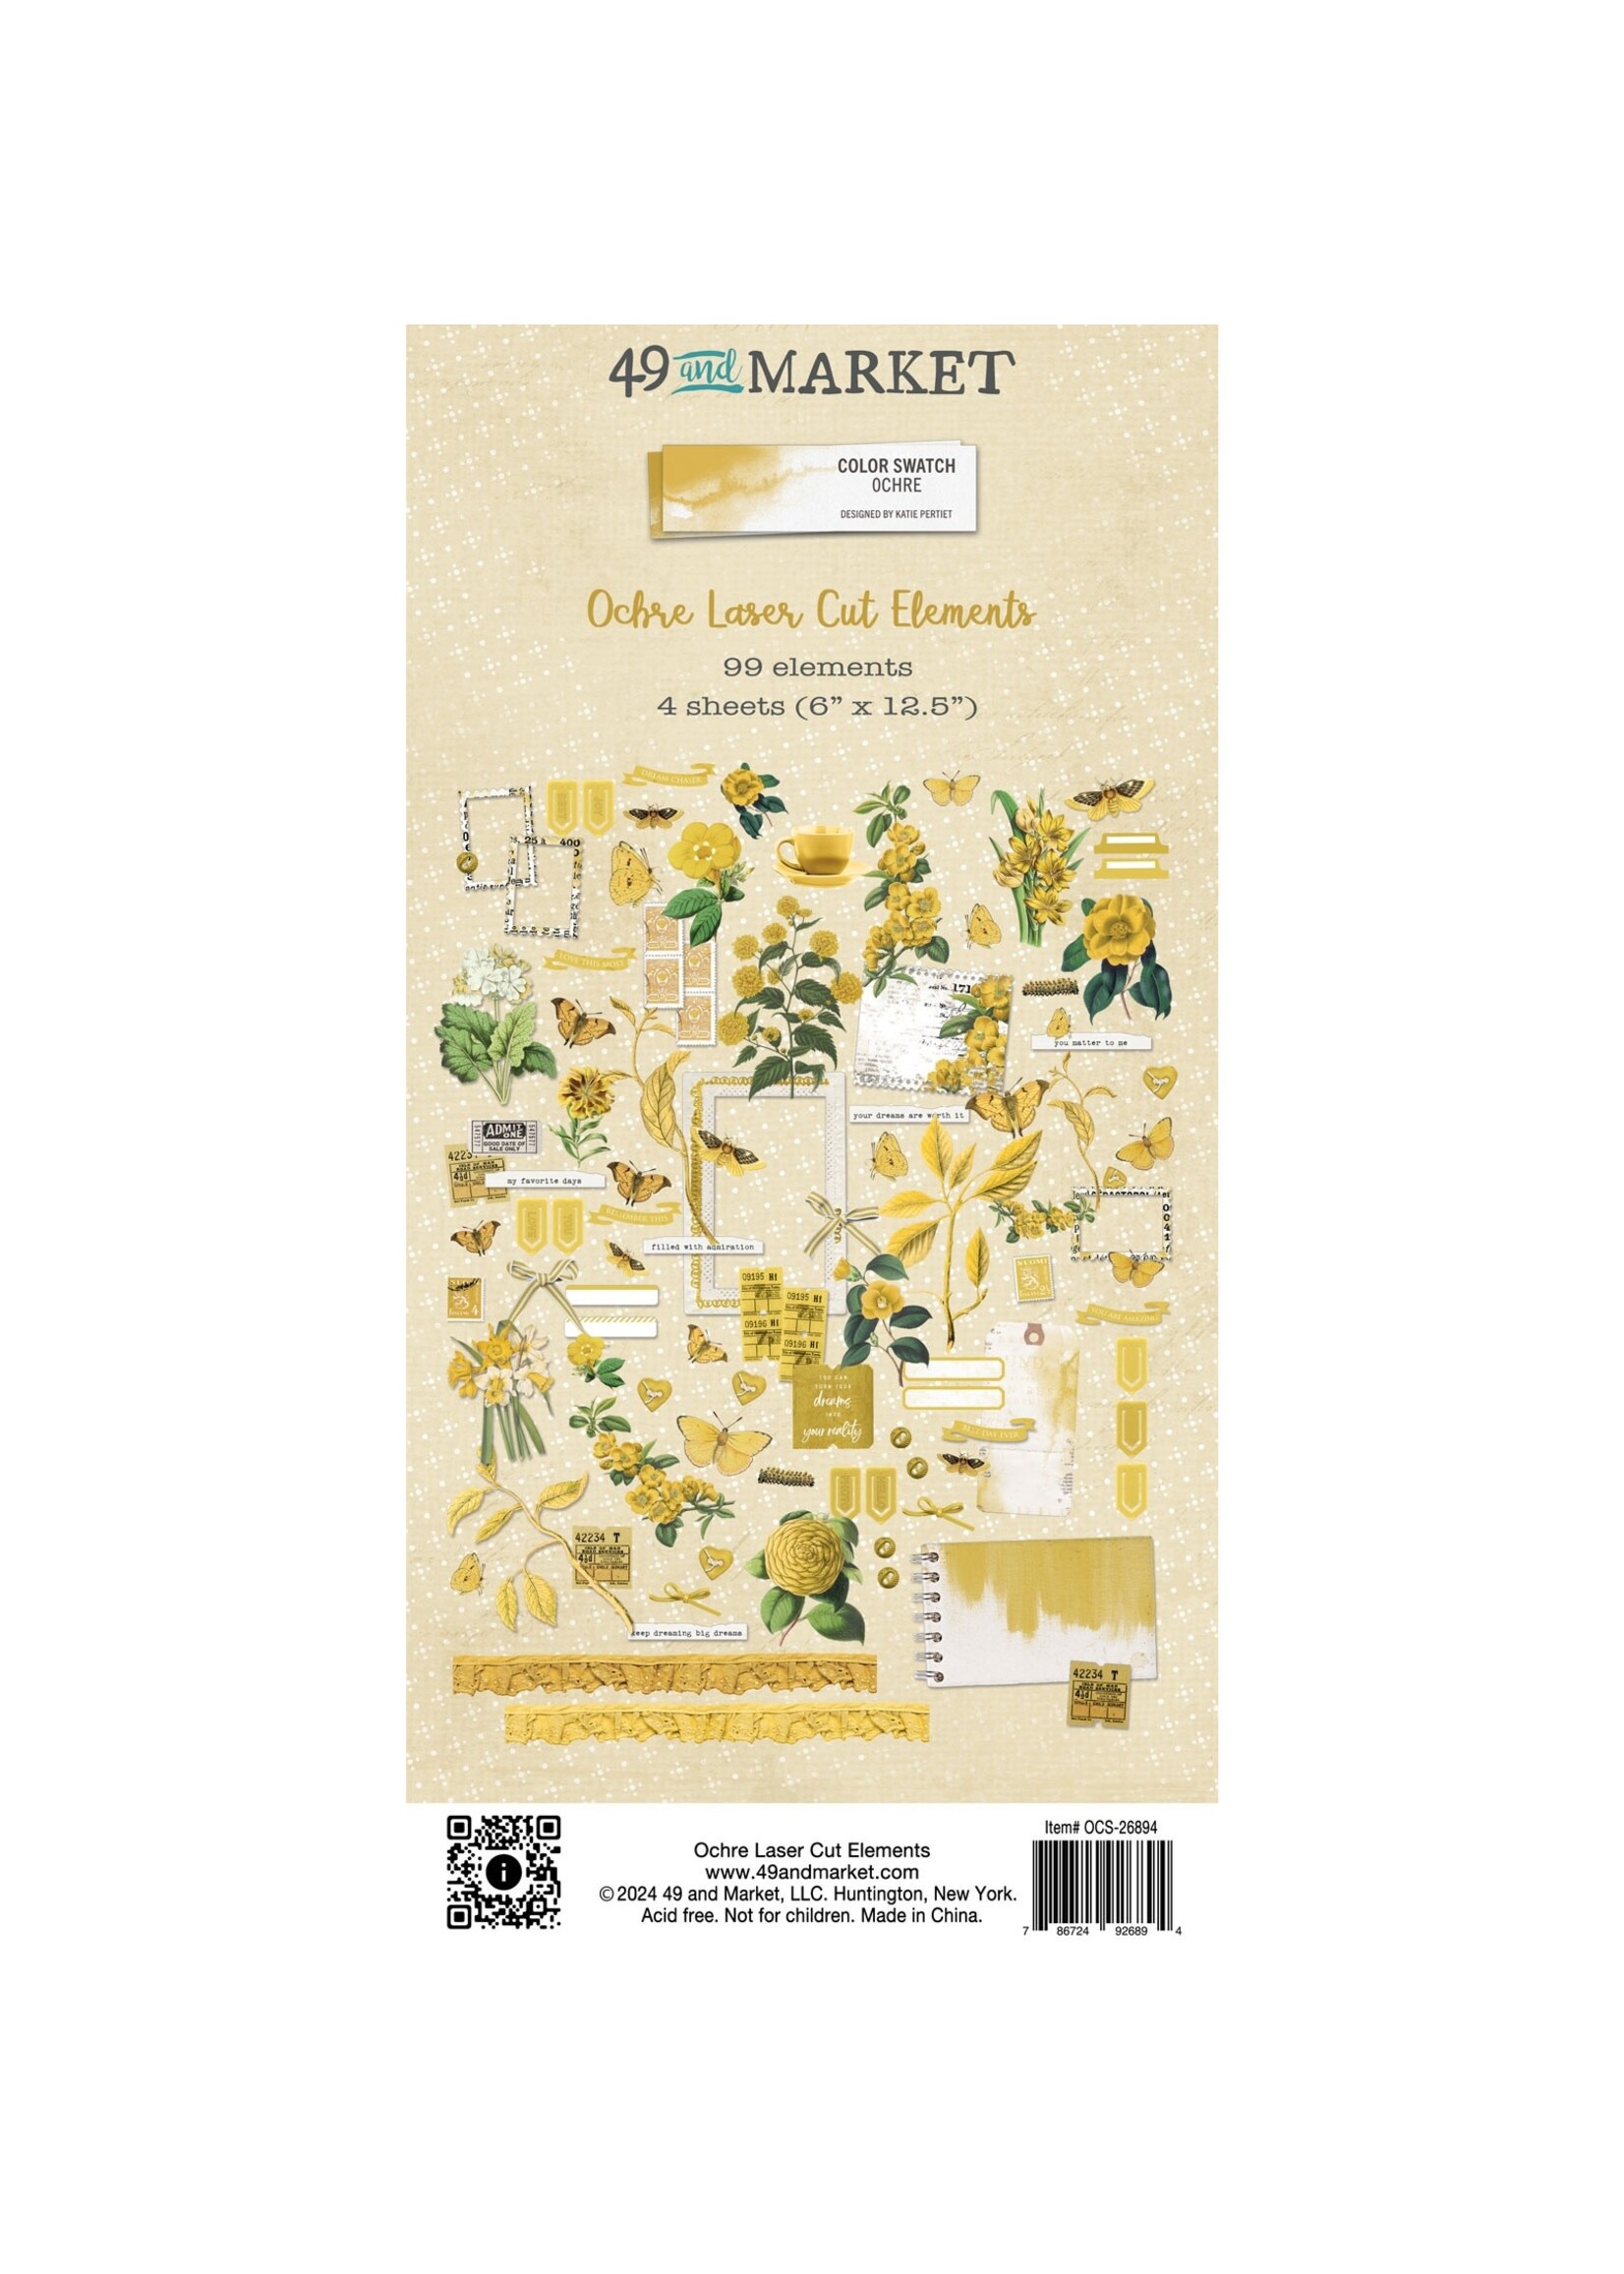 49 and Market Color Swatch: Ochre Laser Cut Outs-Elements